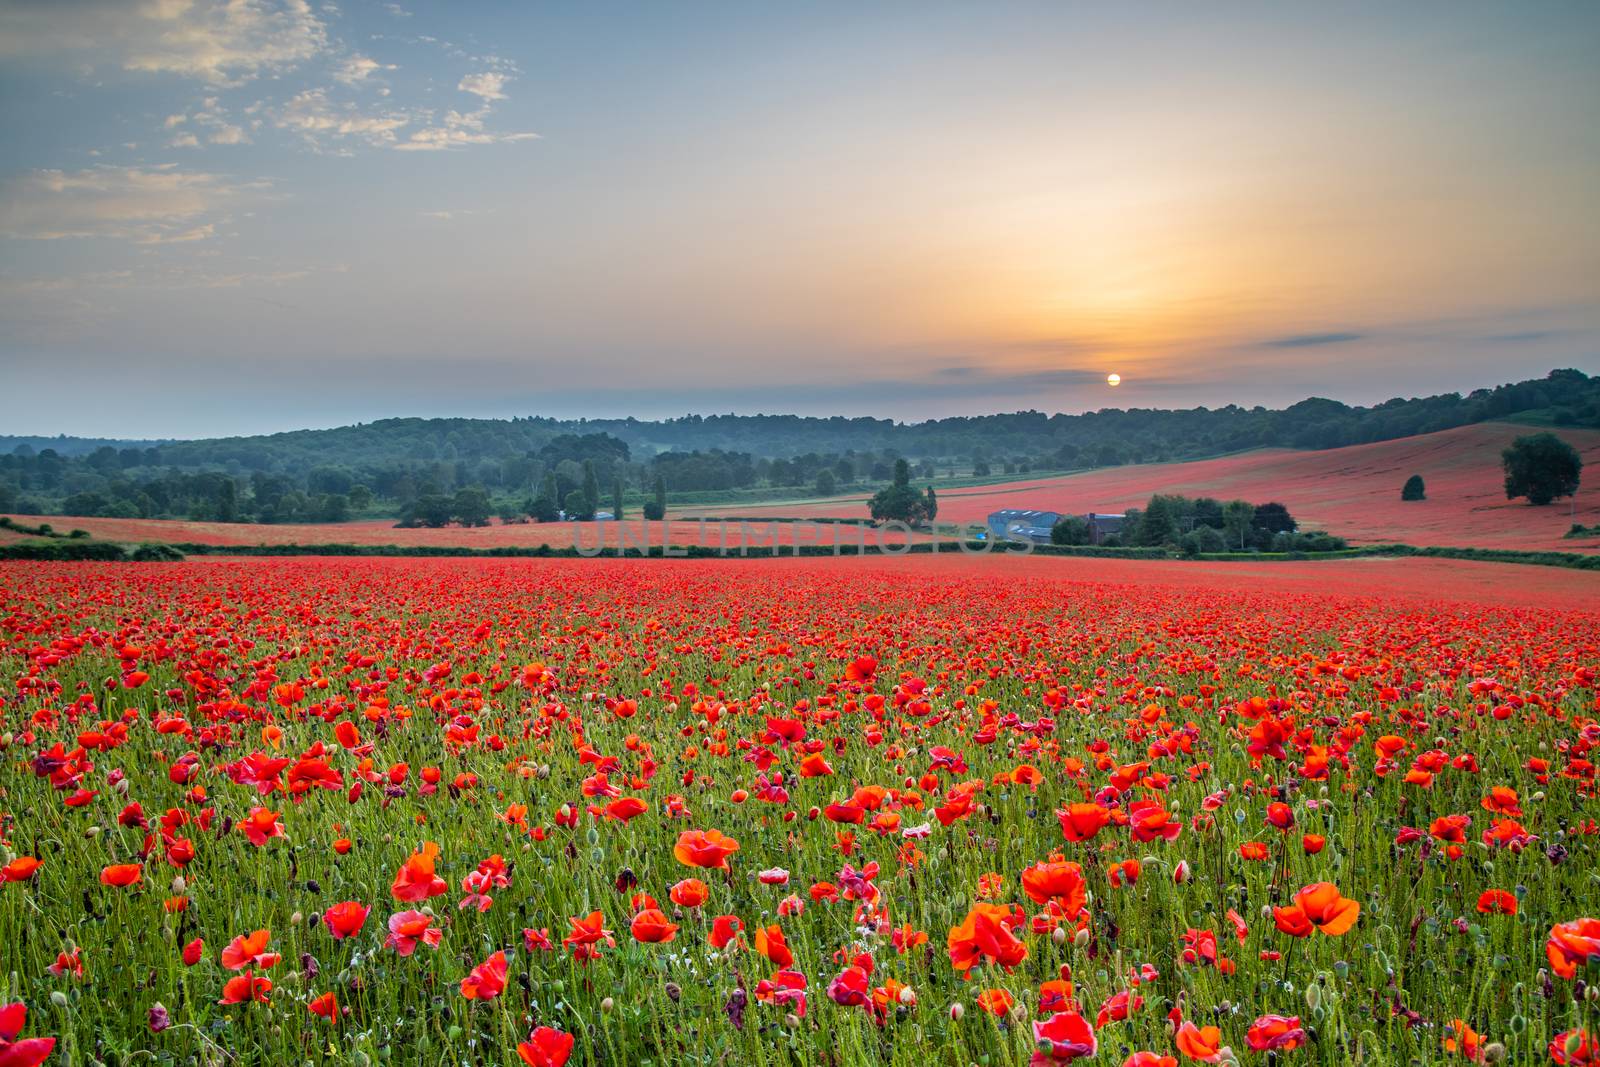 Beautiful Poppy Field at Brewdley, West Midlands at Dawn by kstphotography